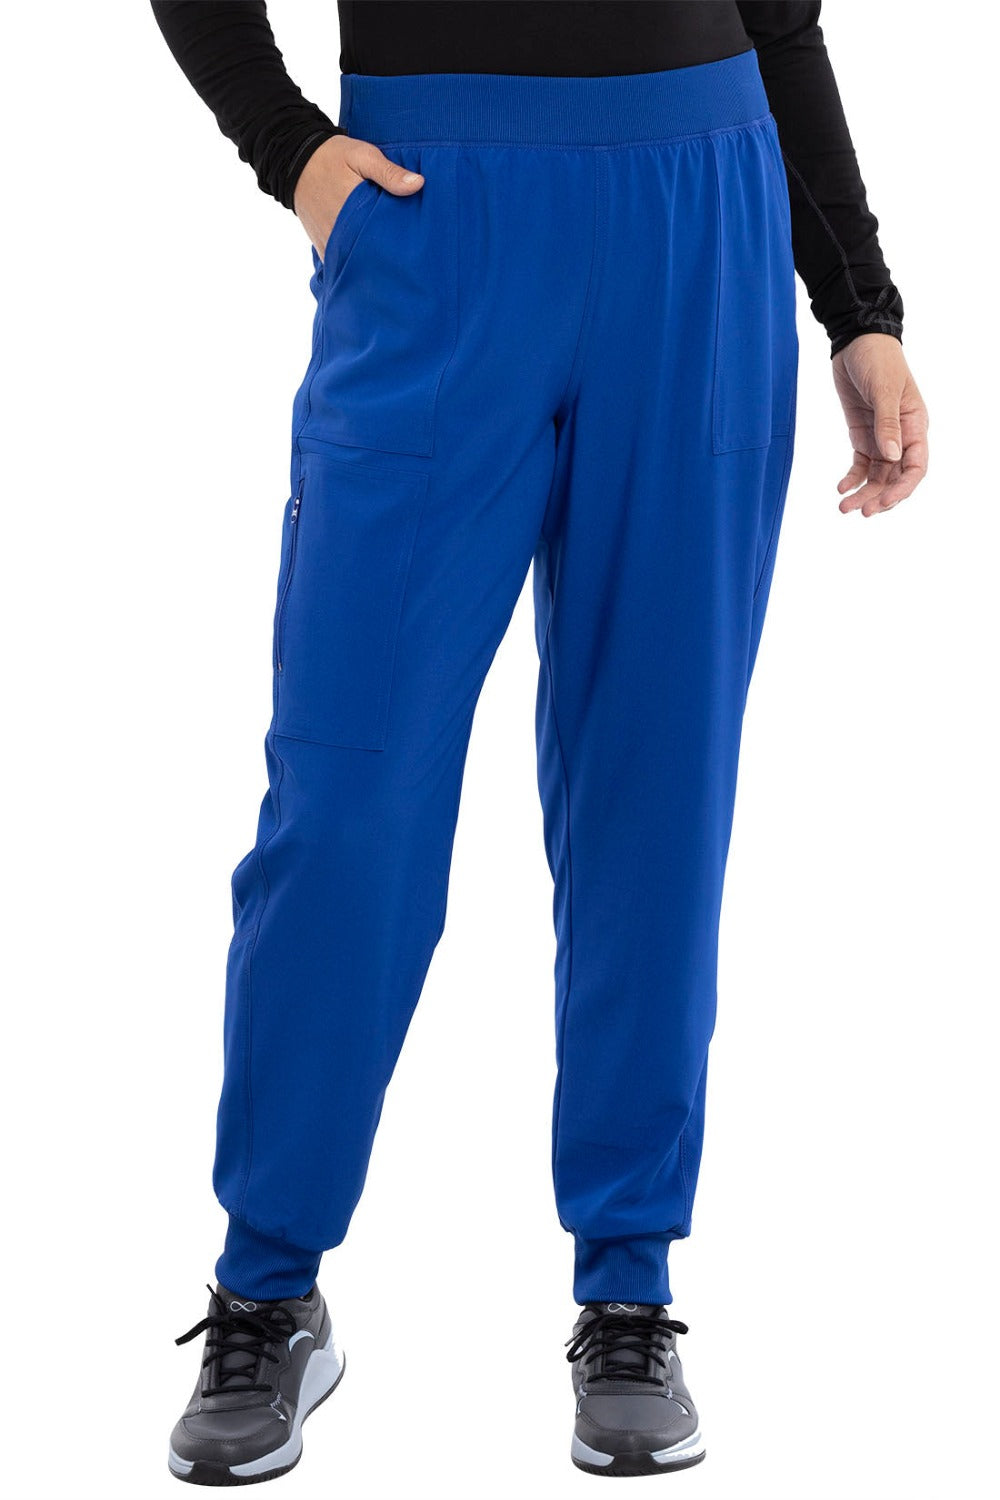 Cherokee Allura Scrub Pant Pull On Jogger in Galaxy Blue at Parker's Clothing and Shoes.